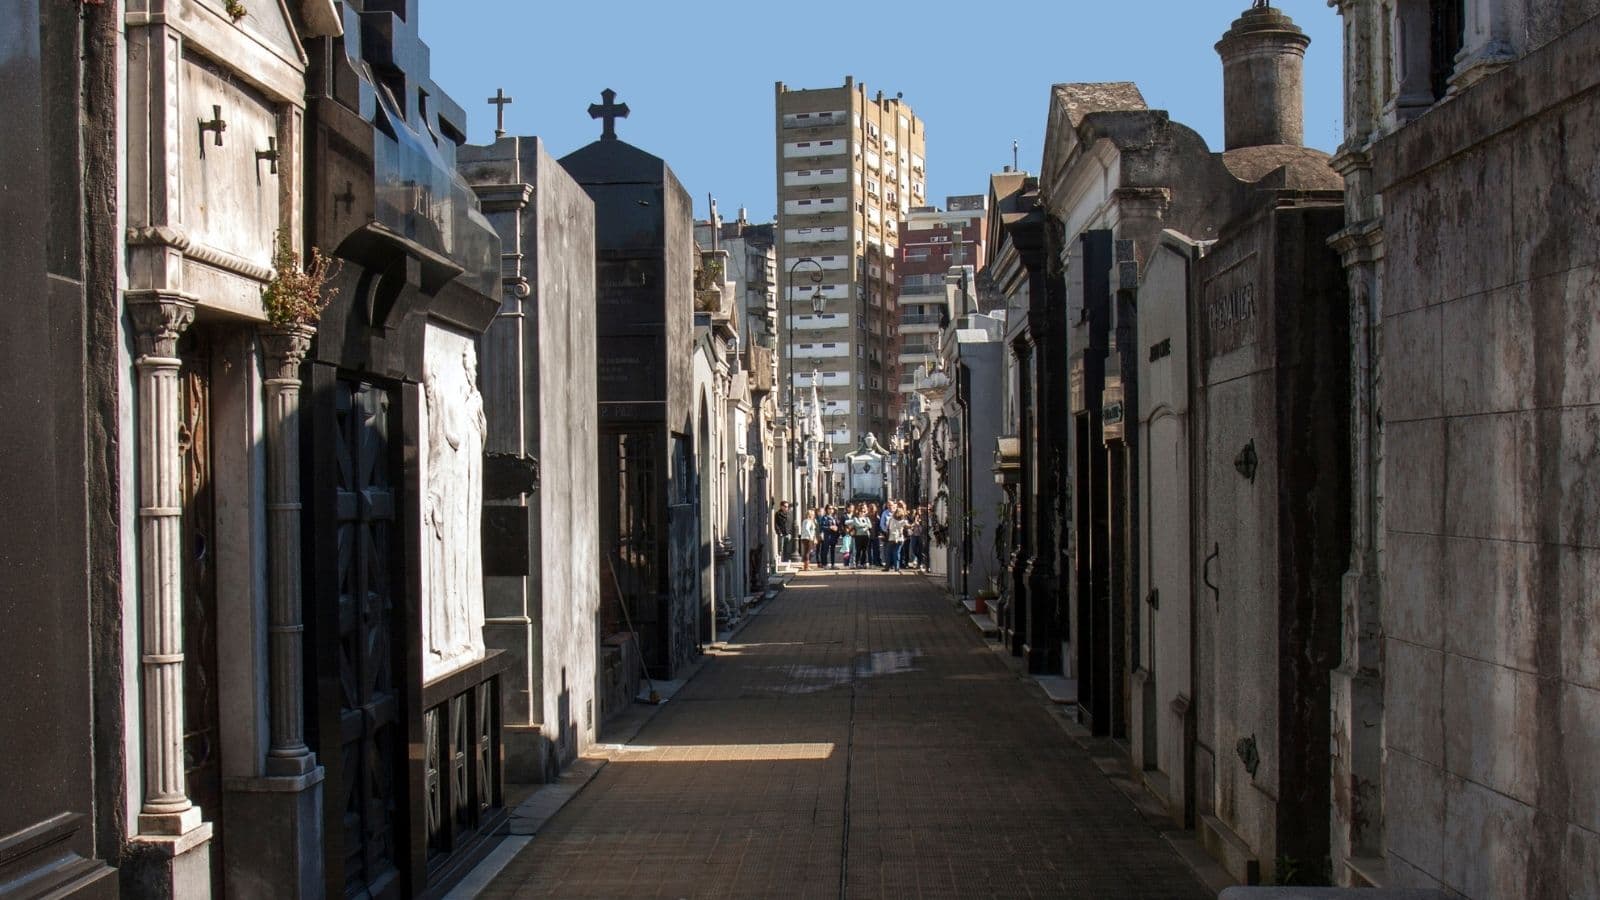 a look inside Buenos Aires' most famous cemetery.